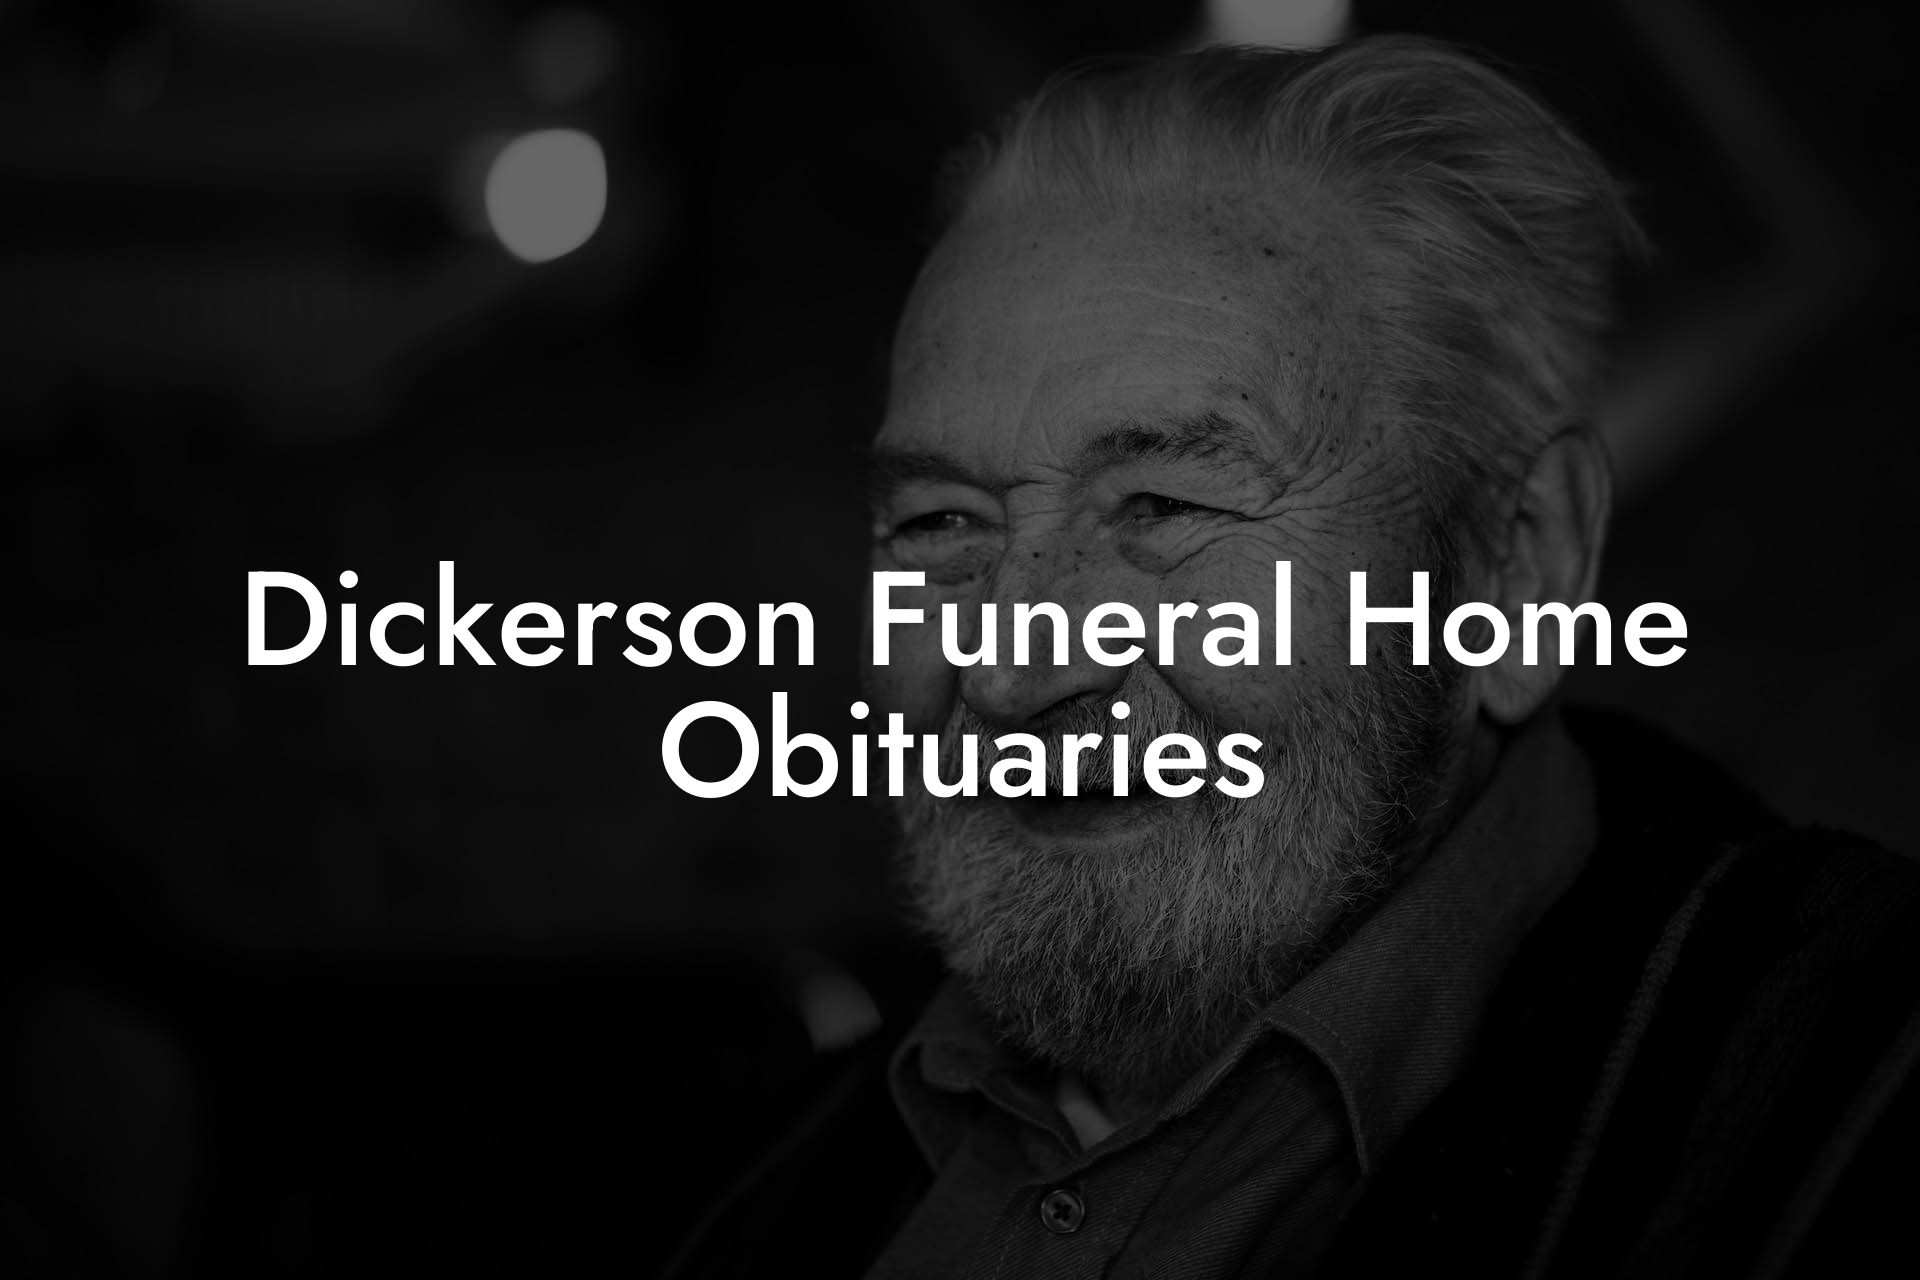 Dickerson Funeral Home Obituaries